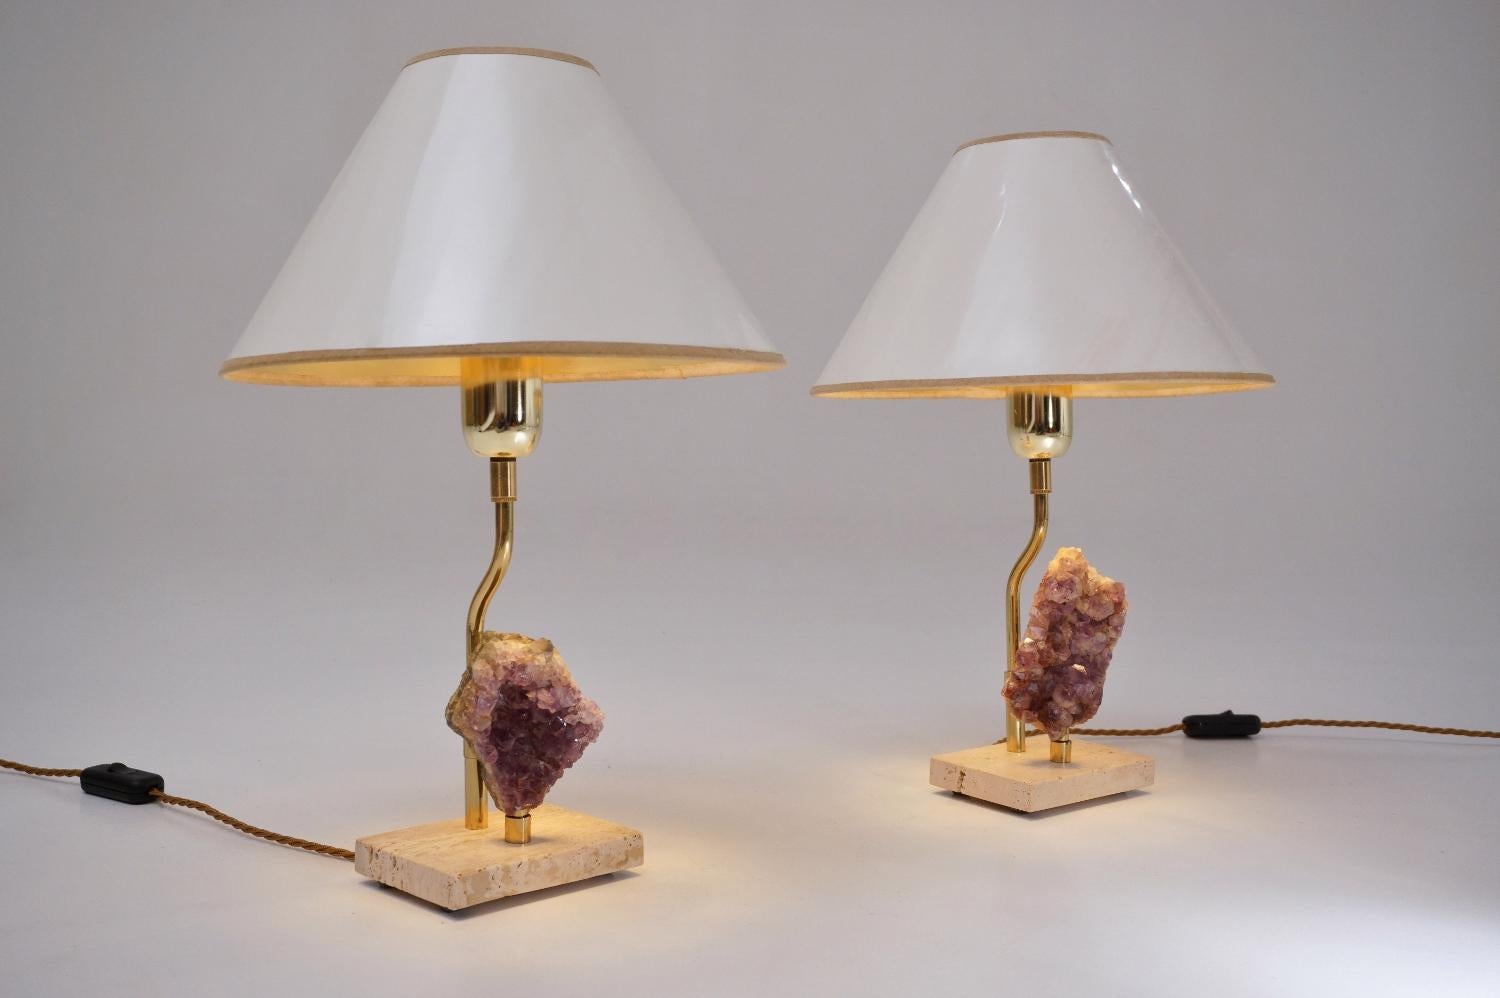 Willy Daro lamps, a matching pair in the Brutalist style with brass frames holding amethyst crystals, circa 1970s, Belgium.

These table lamps have been gently cleaned while respecting the vintage patina. Both are newly rewired, earthed, fully